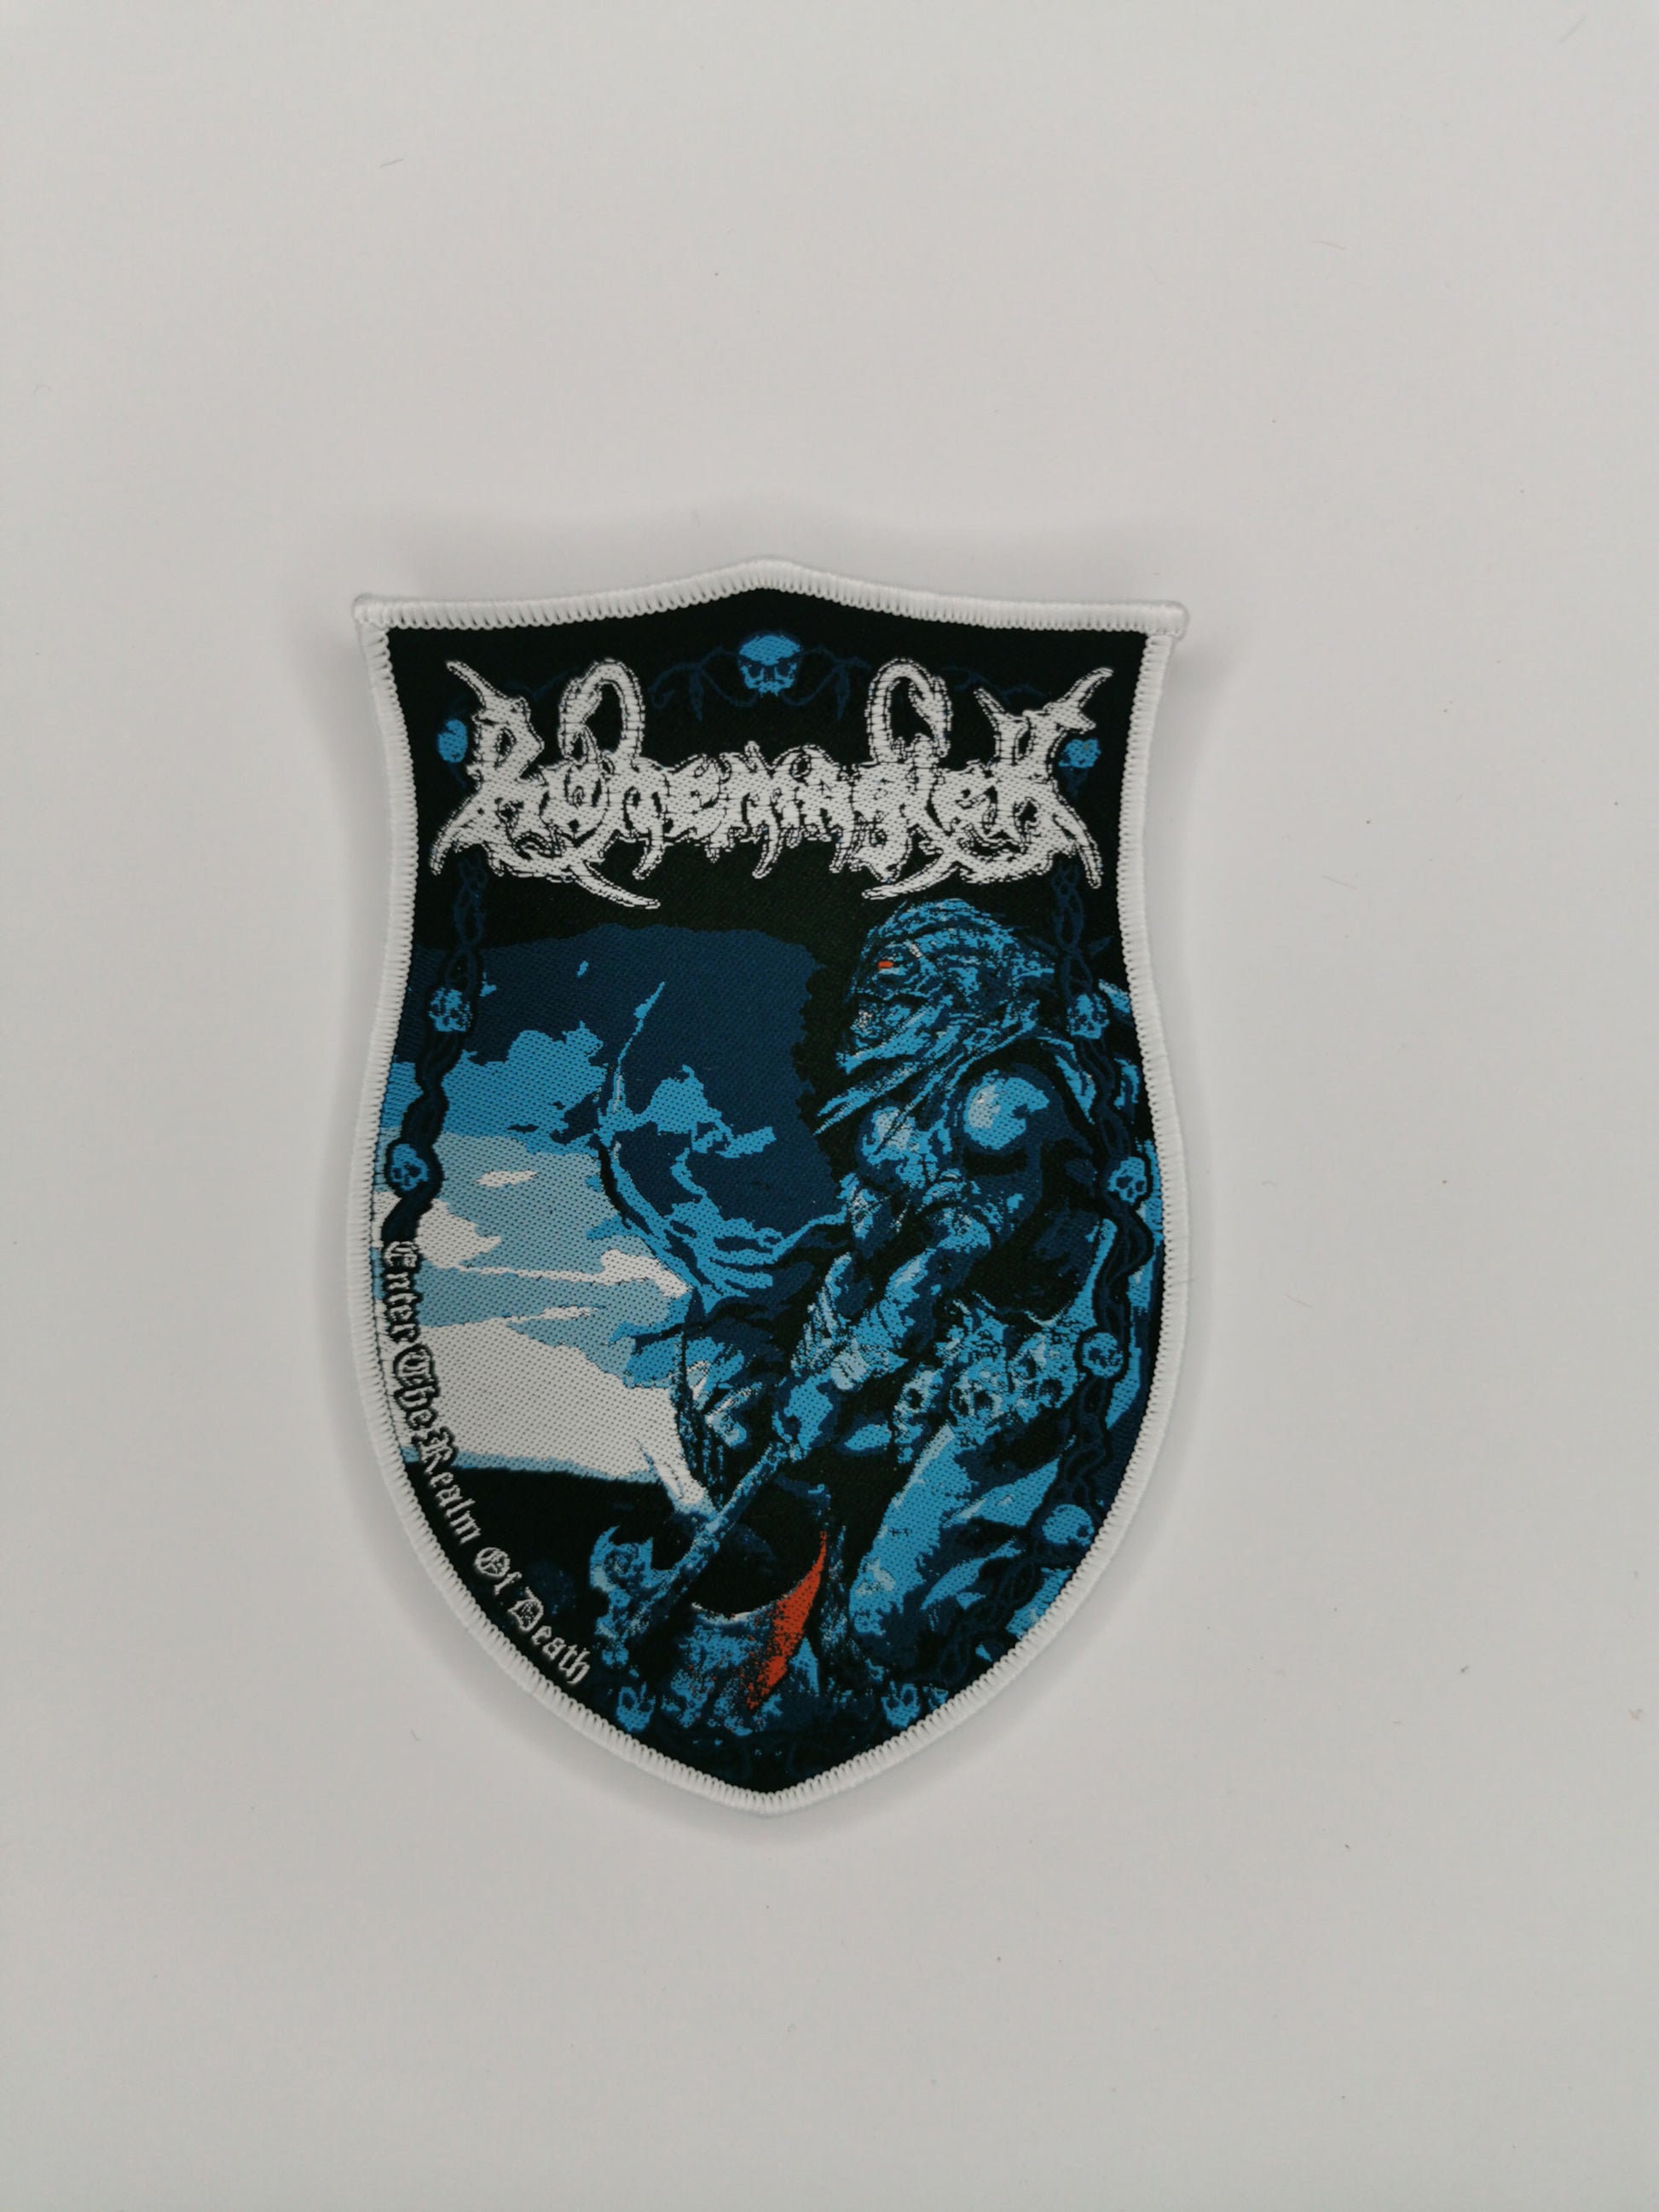 Temporal Dimensions Patches Runemagick Enter the Realm of Death Metal White Border Woven Patch